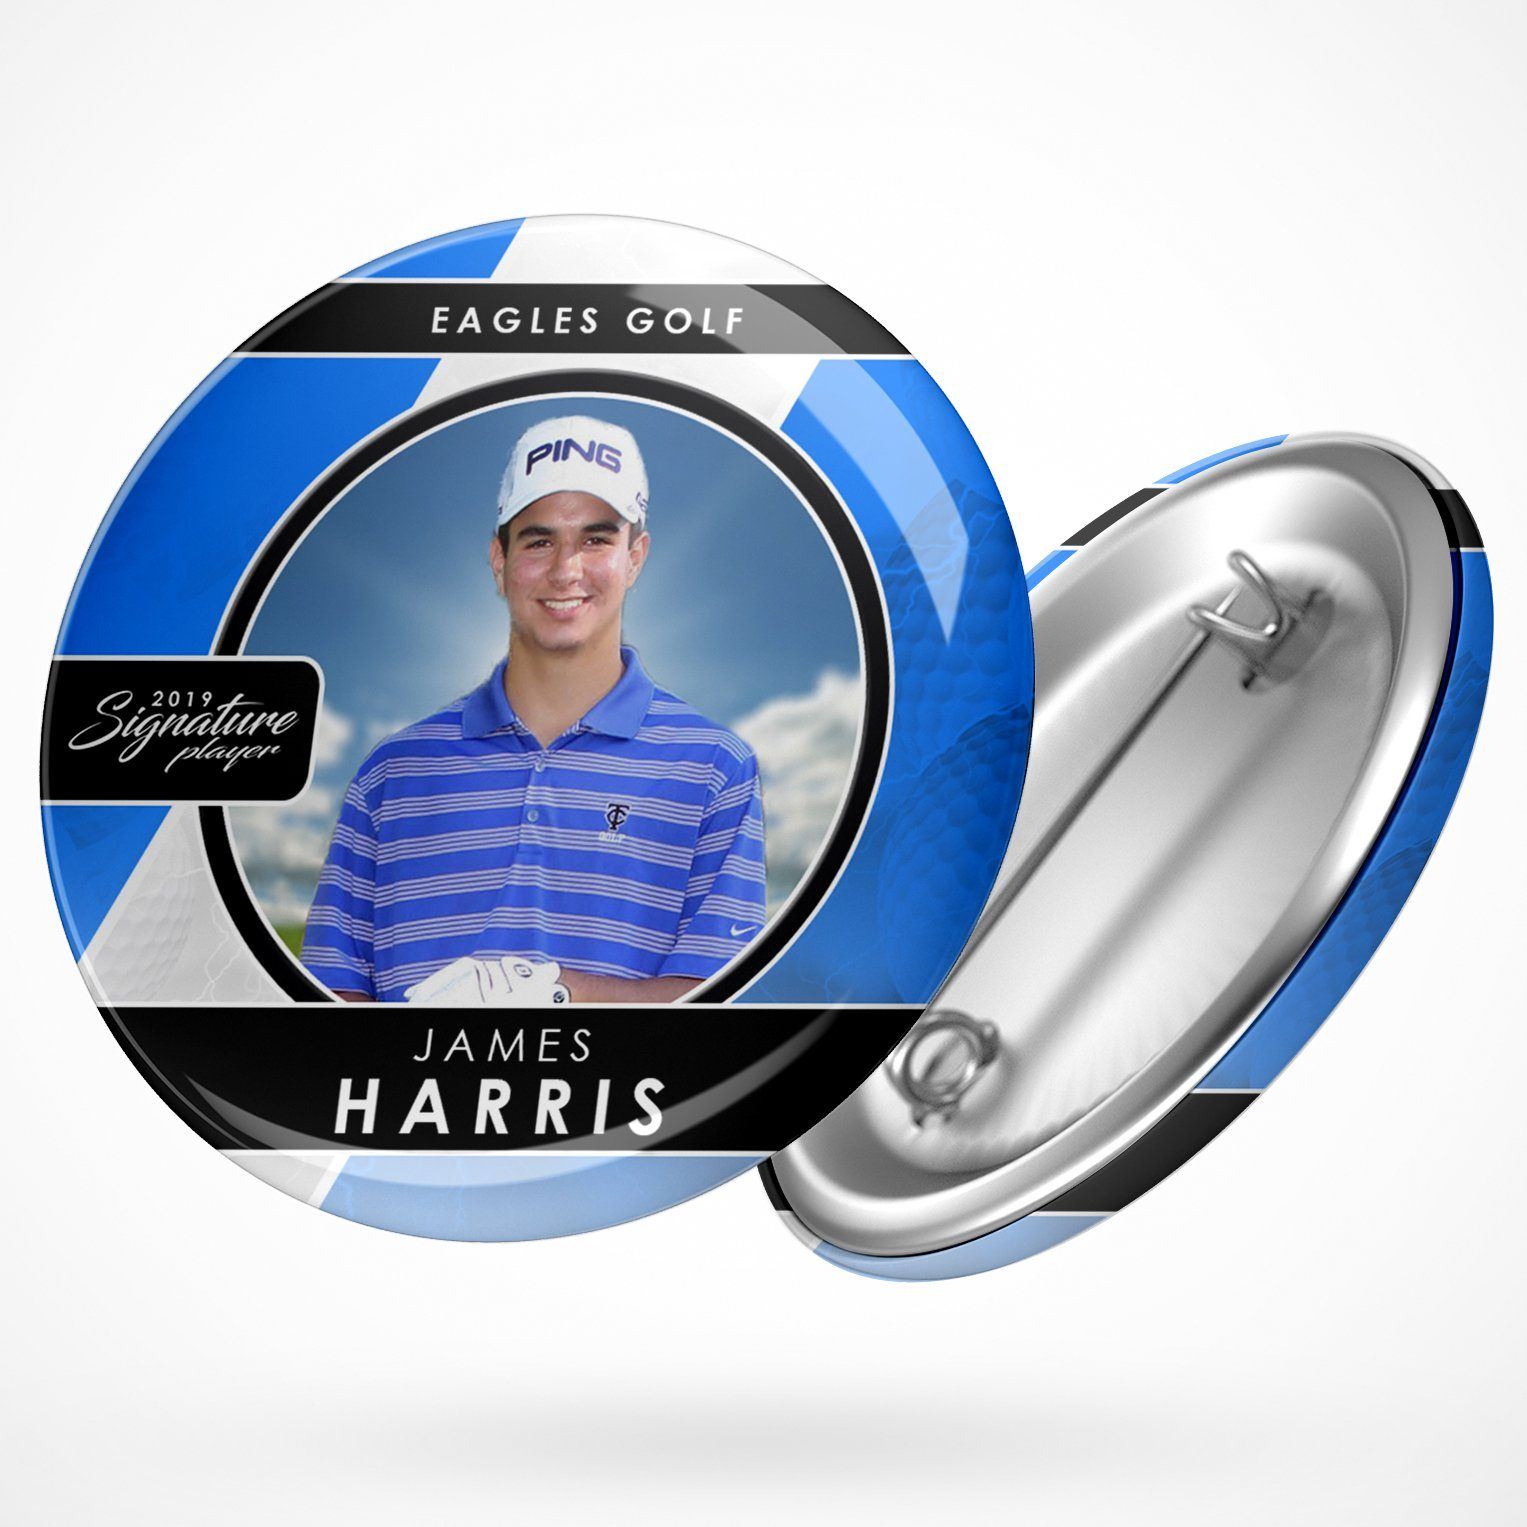 Signature Player - Golf - V3 - T&I Drop-In Collection-Photoshop Template - Photo Solutions